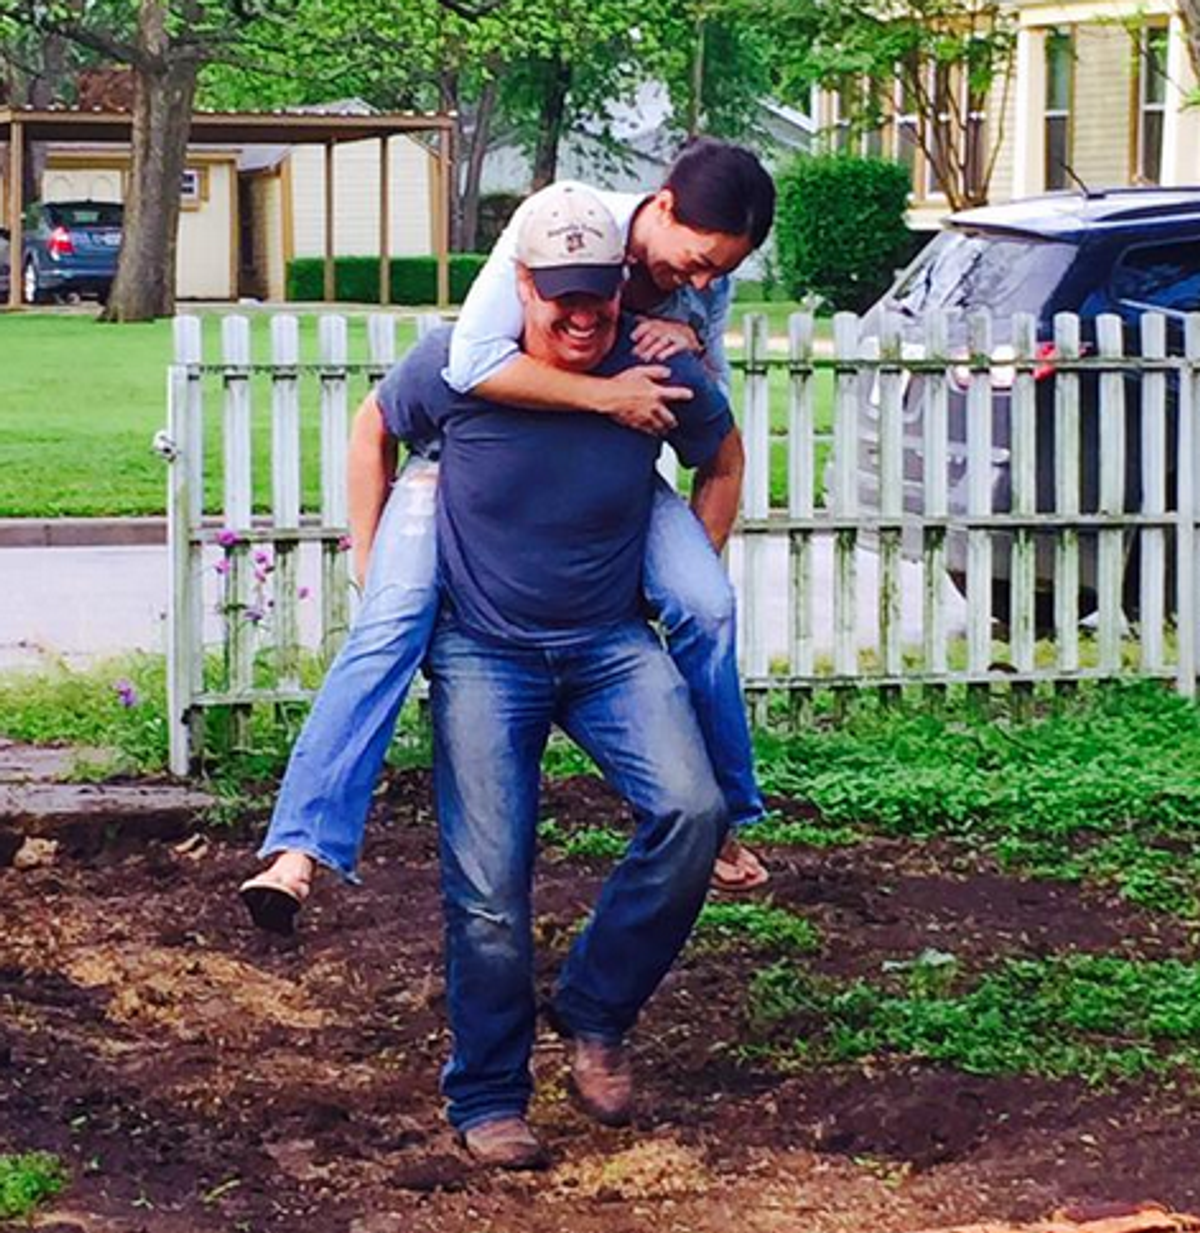 12 Relationship Goals As Told By The Stars Of "Fixer Upper"